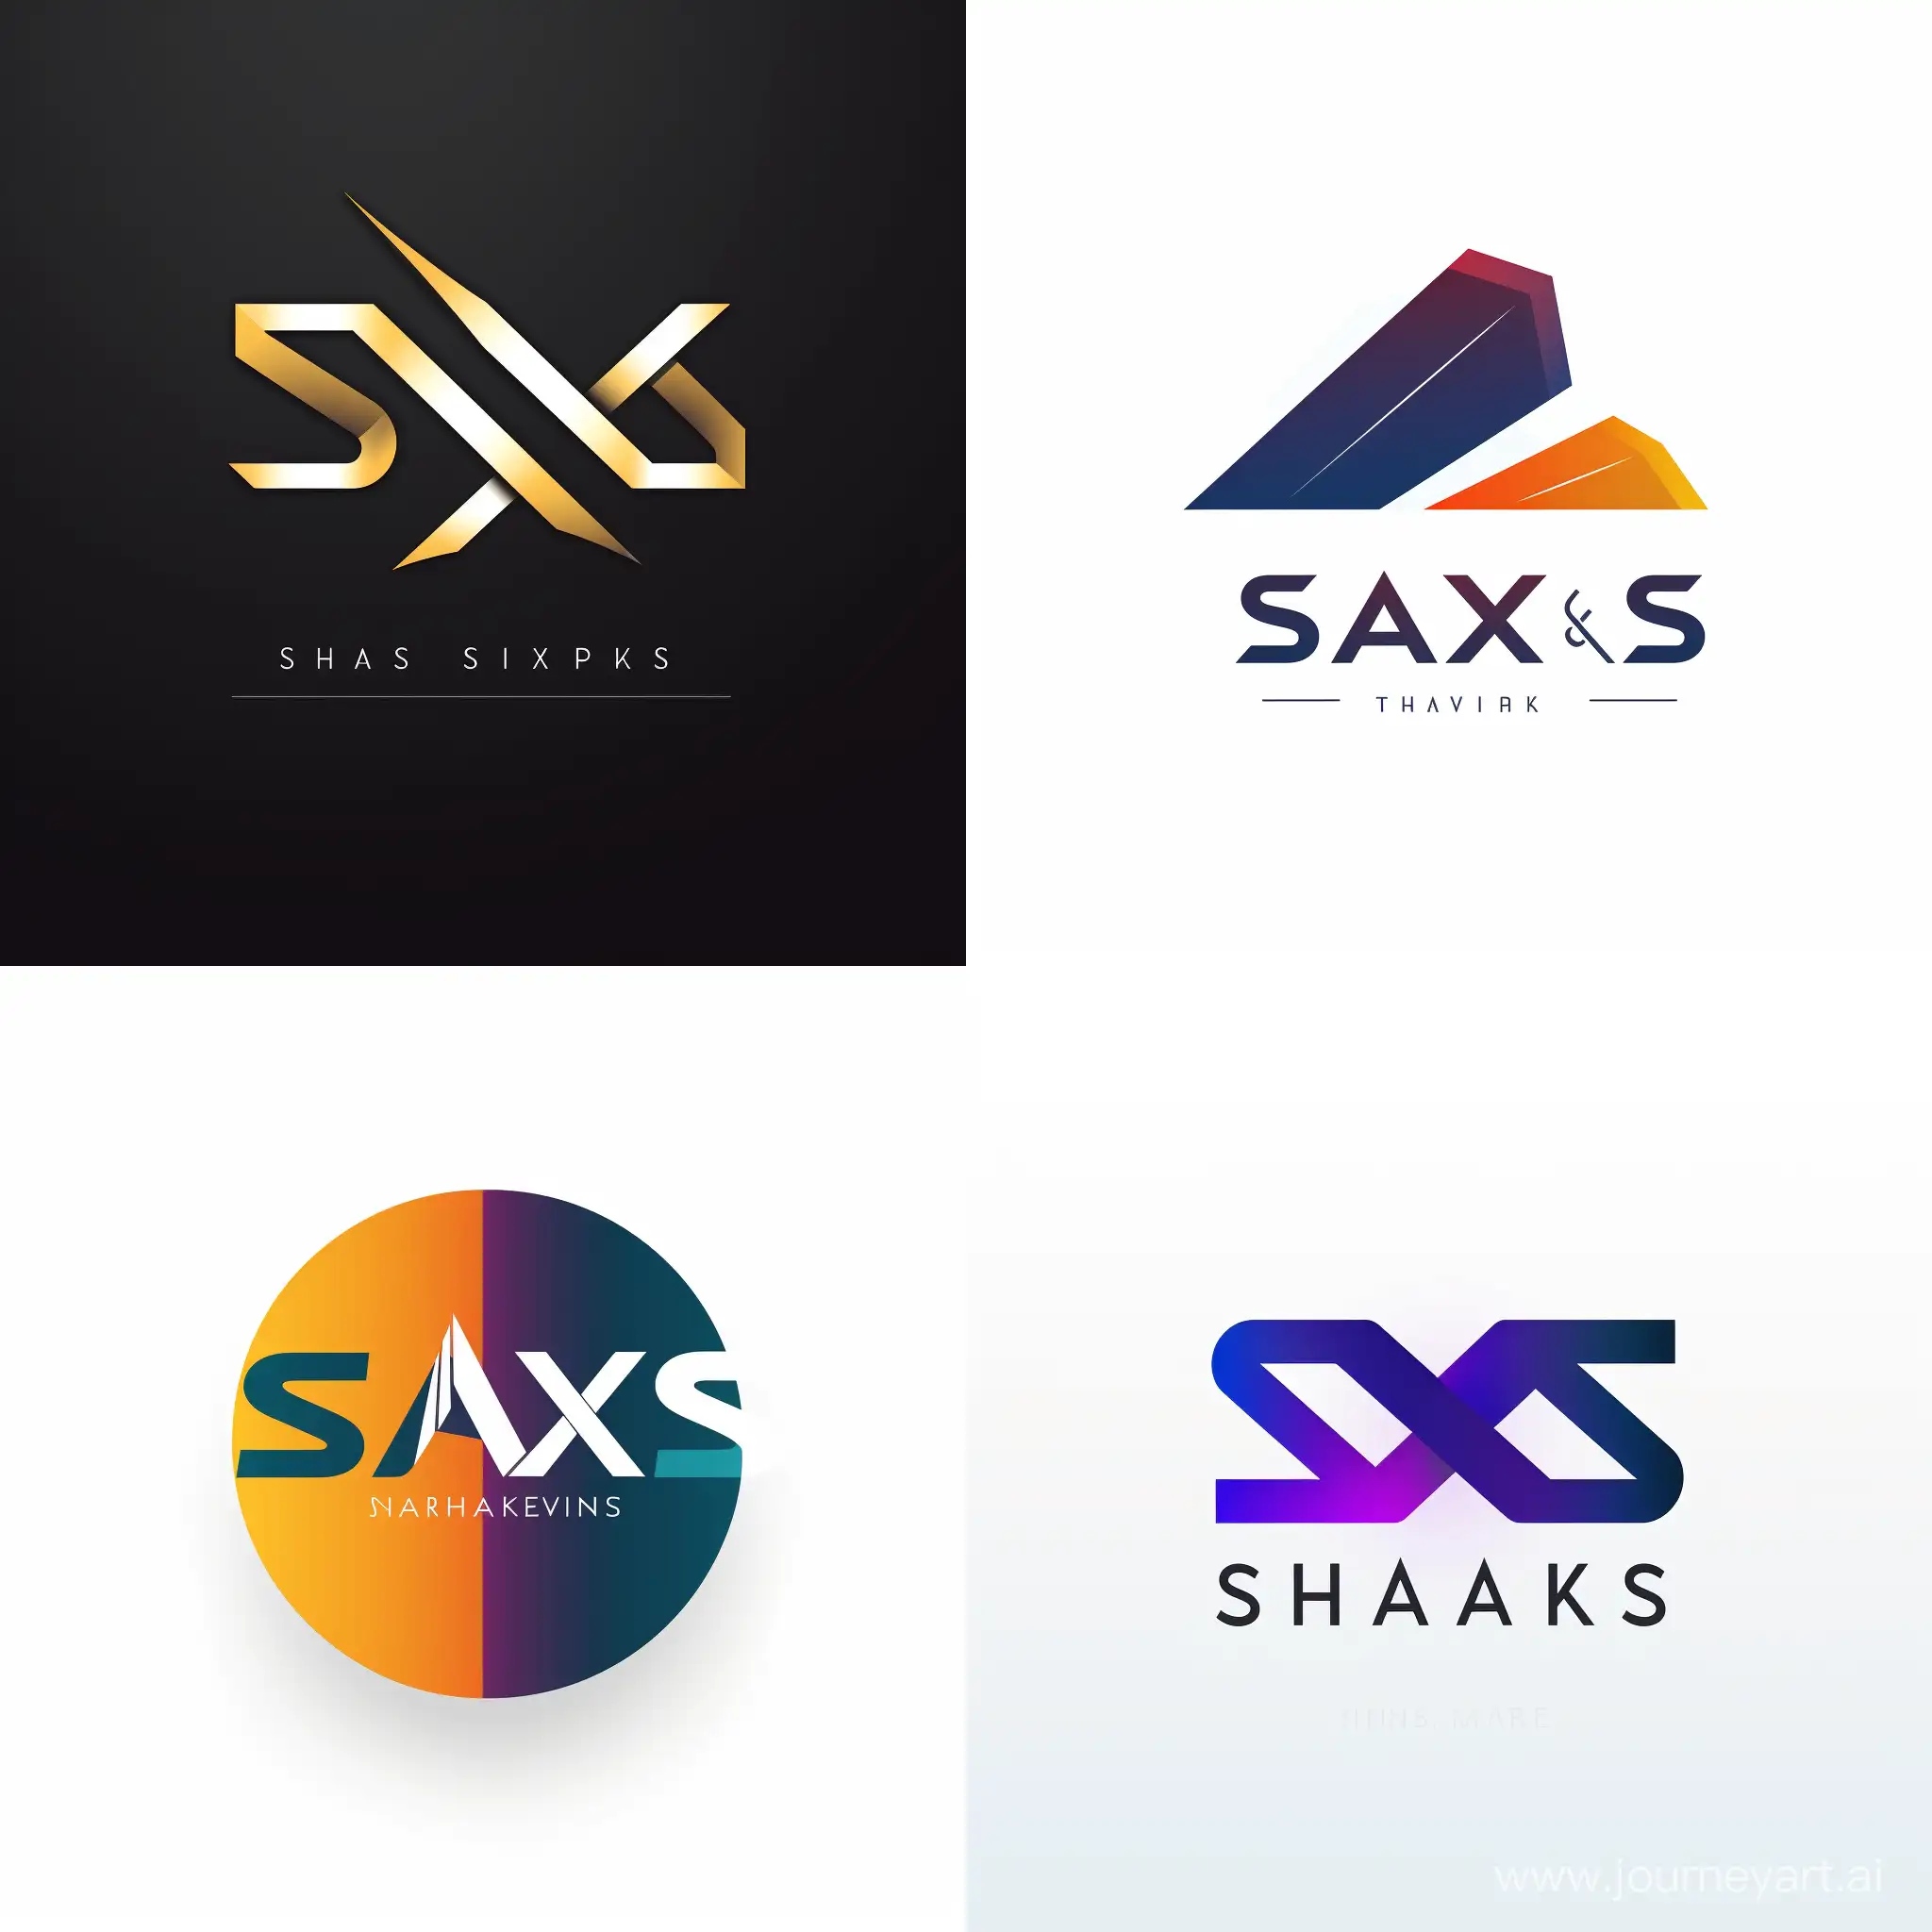 minimalistic flat 2d logo with the letters "SHAXS"